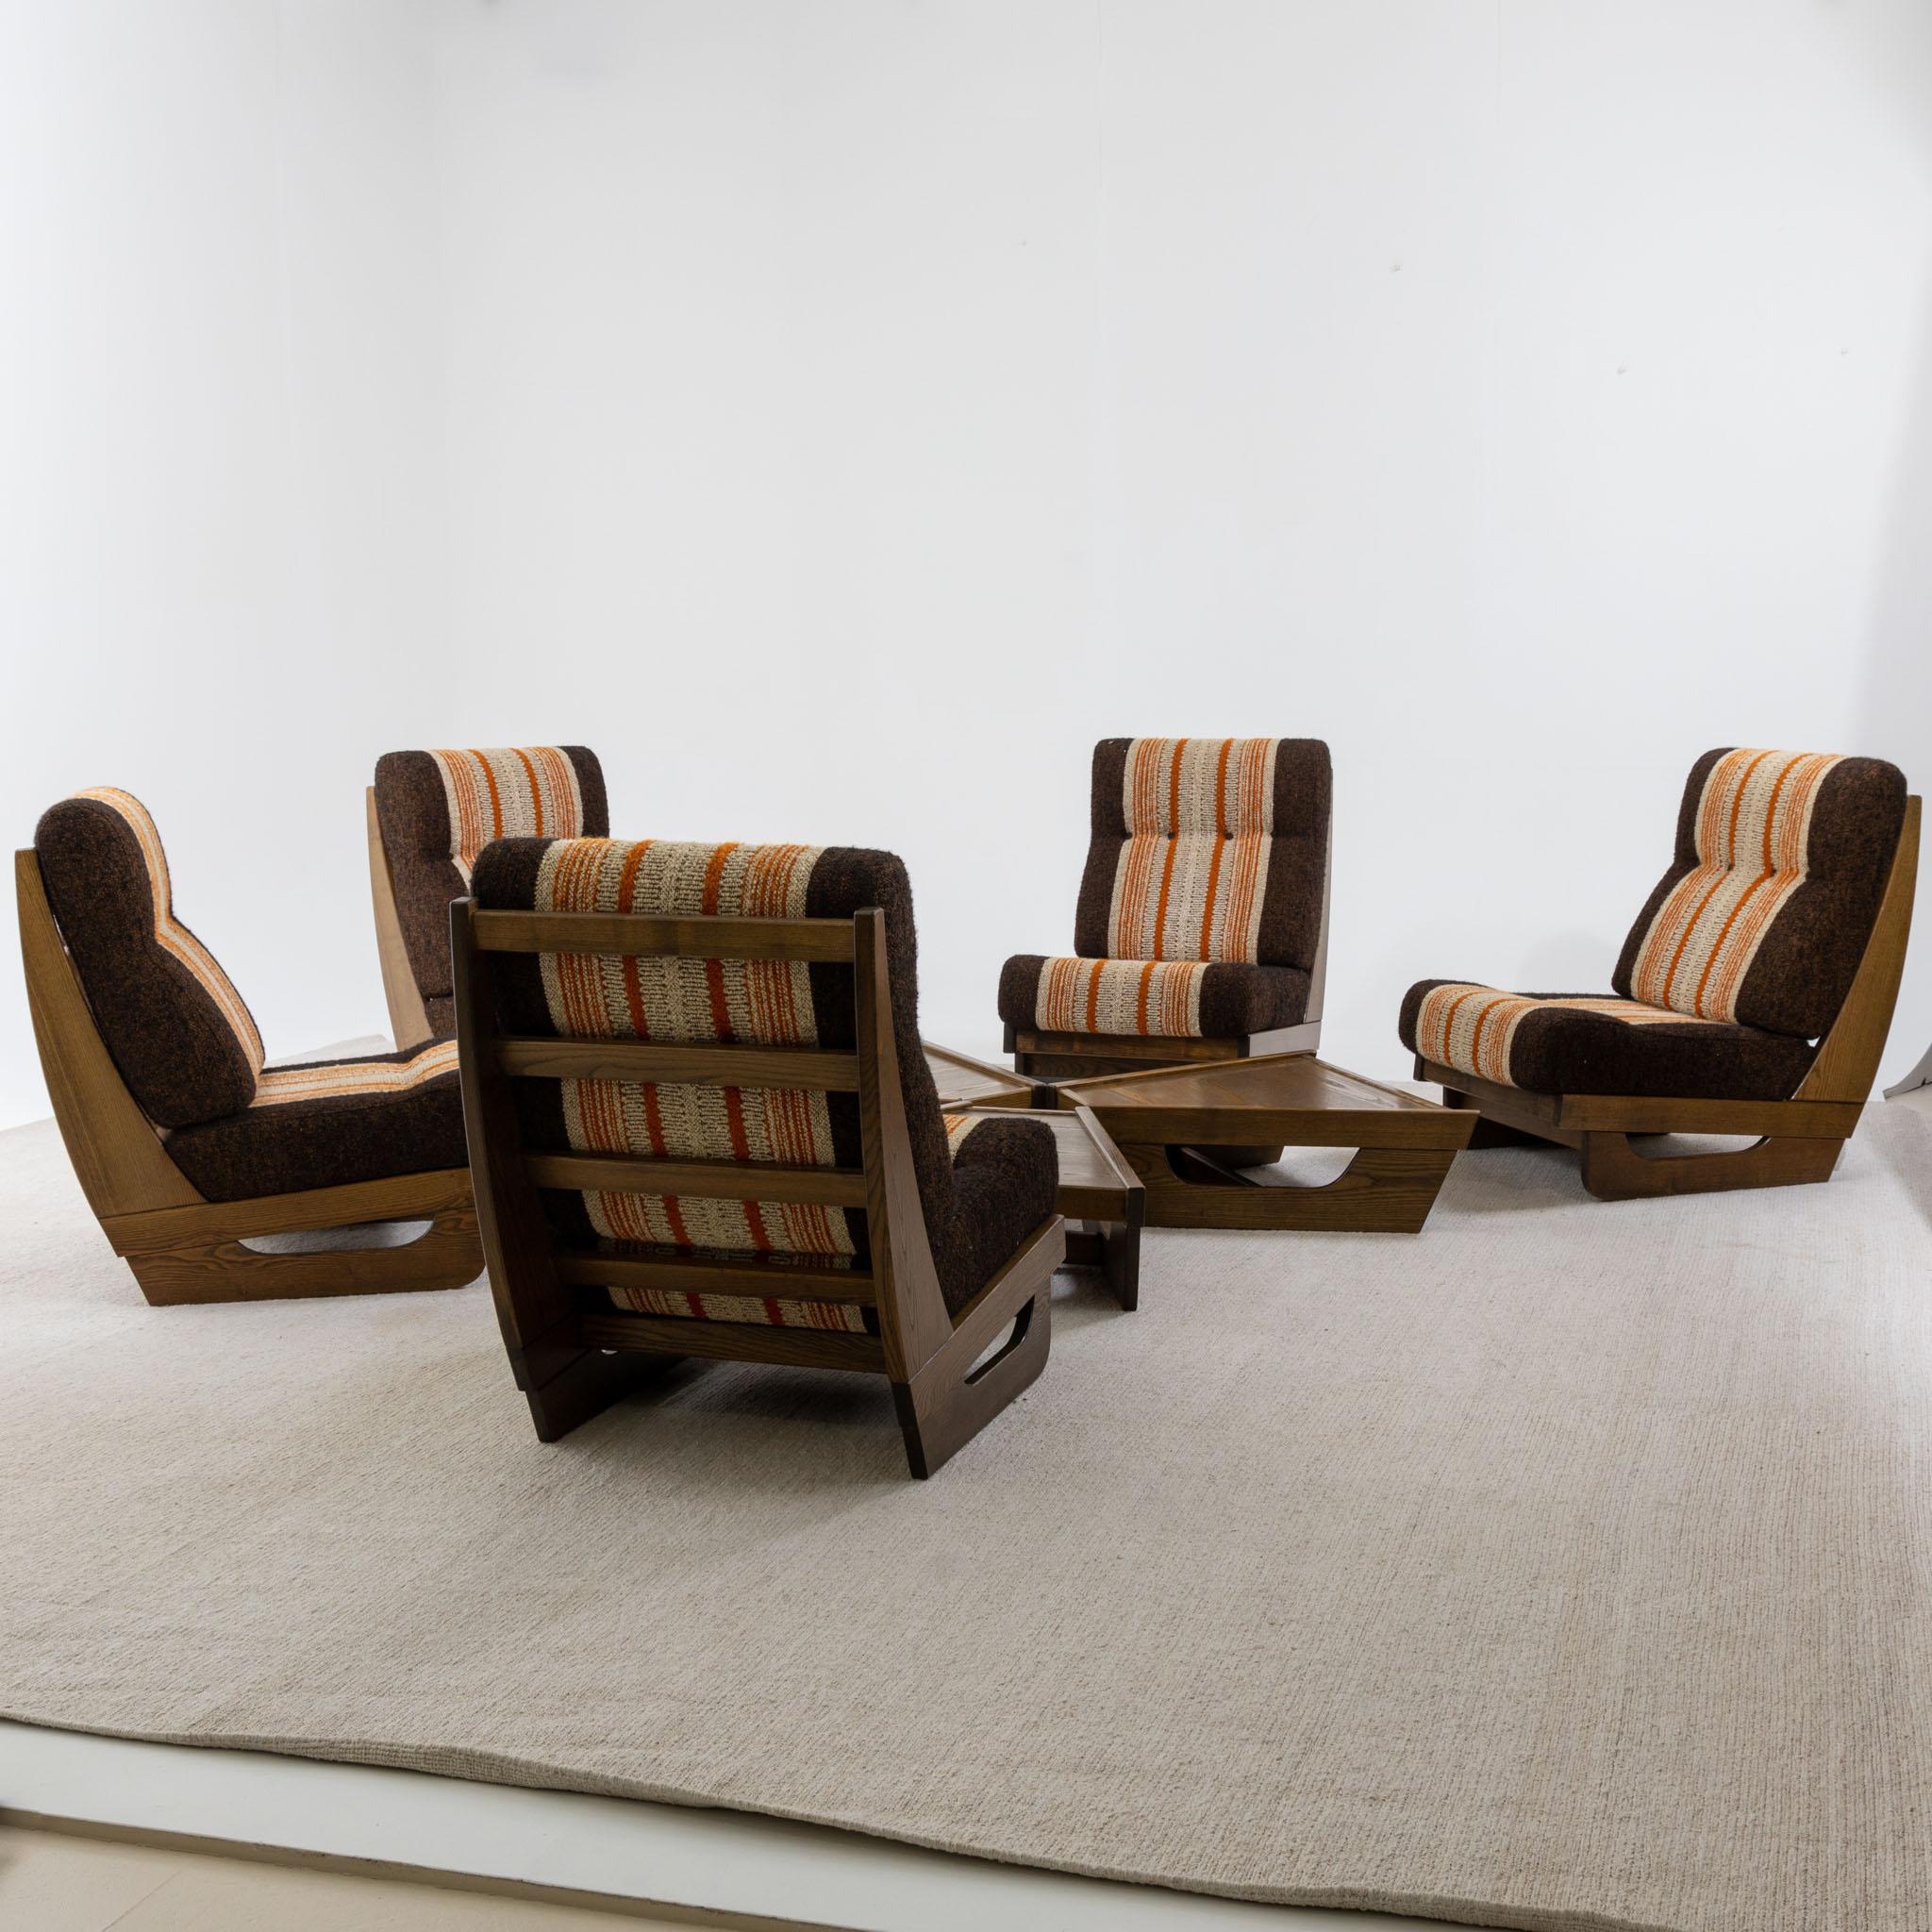 Mid-Century Modern Modular Seating Group with five Lounge Chairs, Italy 1950s For Sale